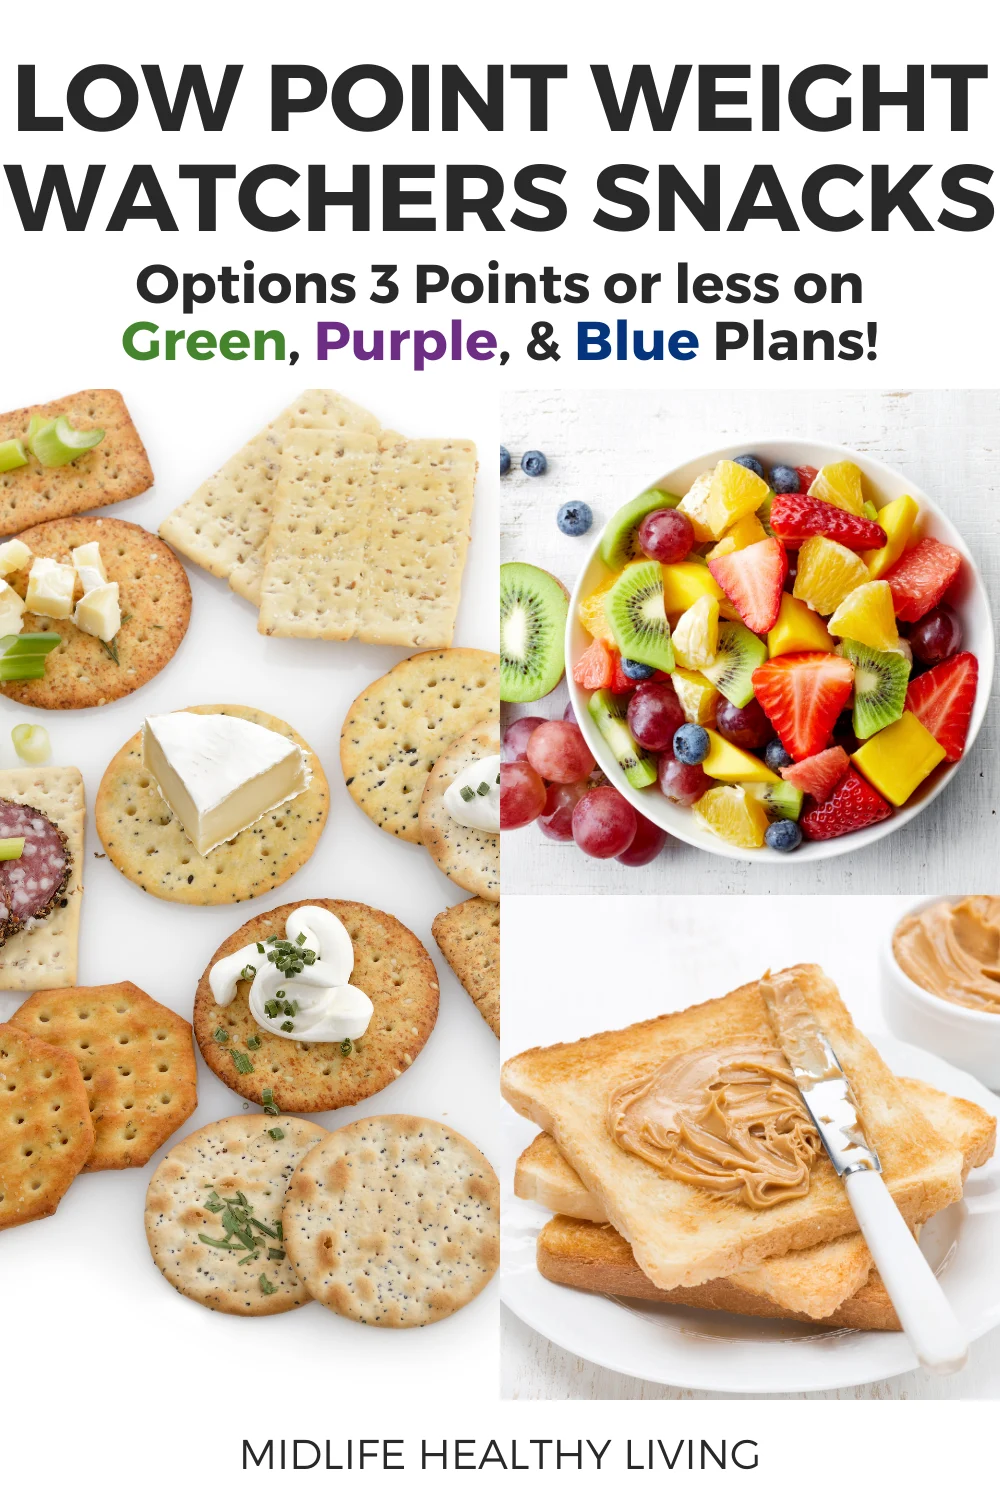 https://www.midlifehealthyliving.com/wp-content/uploads/2014/04/Low-Point-Weight-Watchers-Snacks-Pins.png.webp